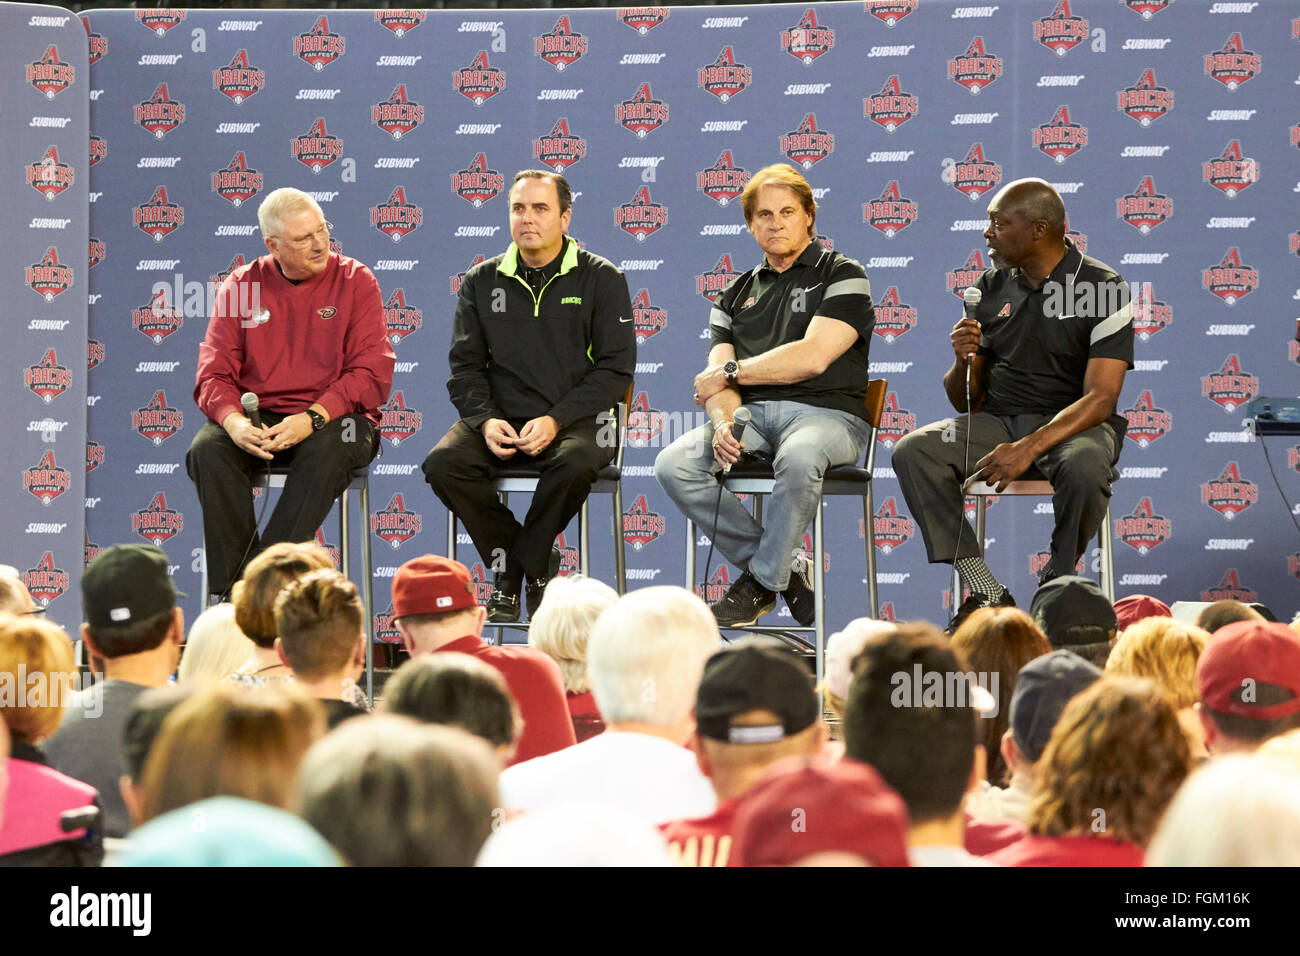 Phoenix, Arizona, USA. 20th February, 2016. Radio host Greg Schulte (left) interviews Diamondbacks President and CEO Derrick Hall, Chief Baseball Officer Tony La Russa, and General Manager Dave Stewart (l. ro r.) during the D-backs Fan Fest at Chase Field Ballpark. The Fan Fest is an annual event that offers fans unprecedented access to current players, coaches, alumni and broadcasters, including autograph and photo sessions on the field. Last year's event drew an estimated 25,000 fans to Chase Field. Credit:  Jennifer Mack/Alamy Live News Stock Photo